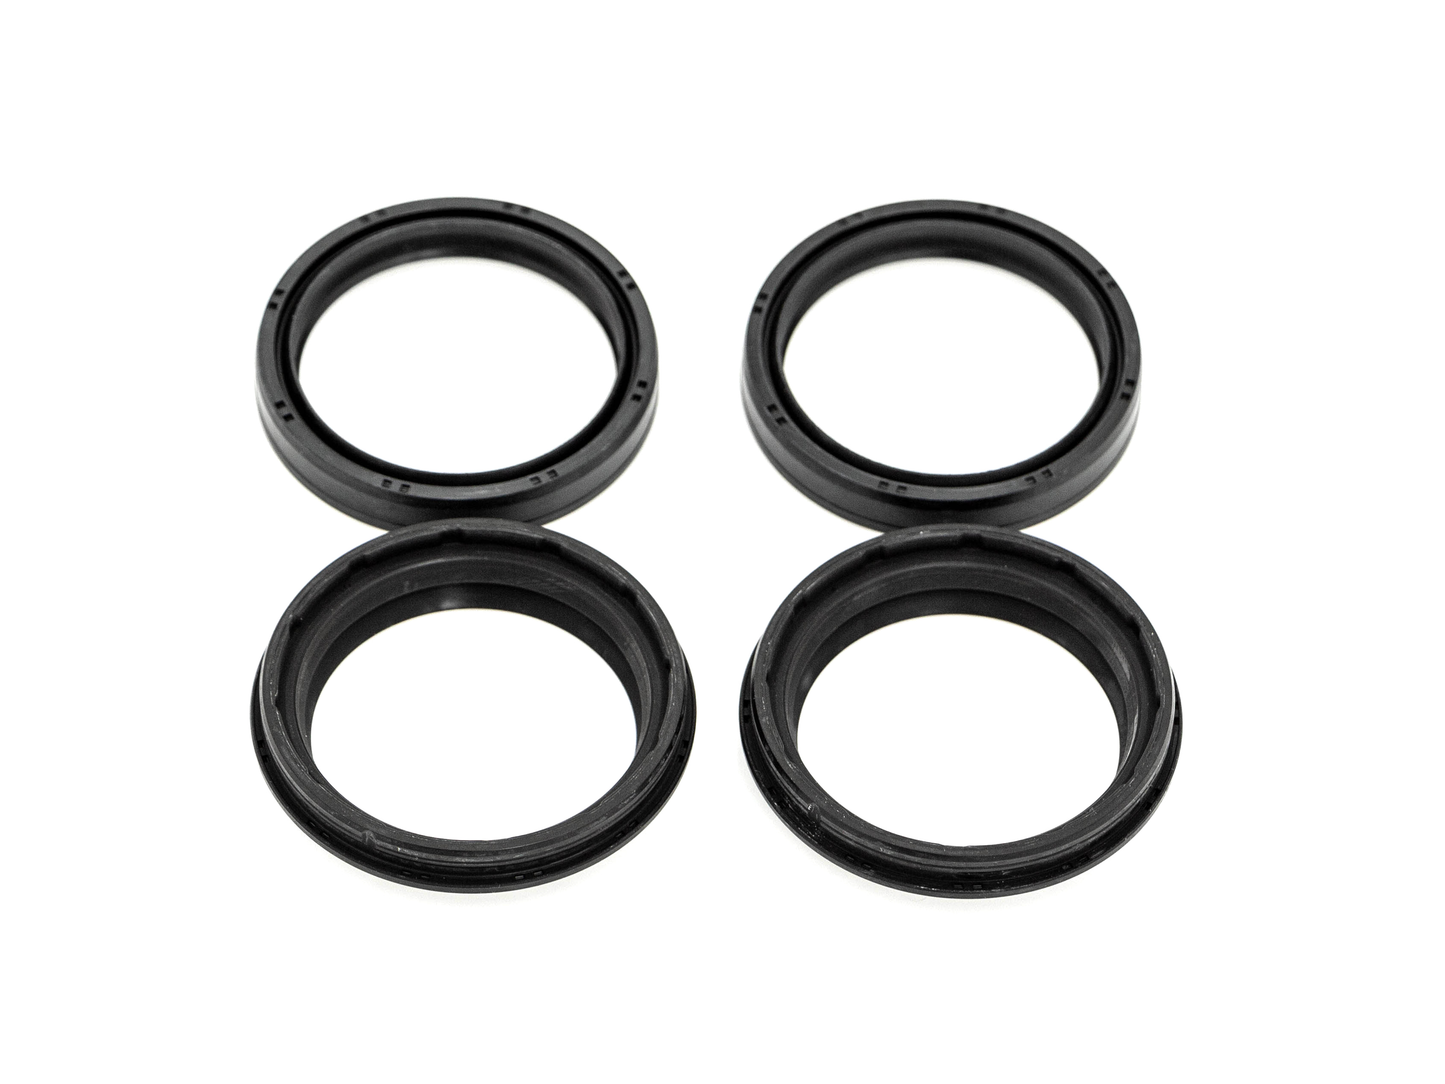 Showa Front Fork Service Kits For Beta RR 2T 125 18-22